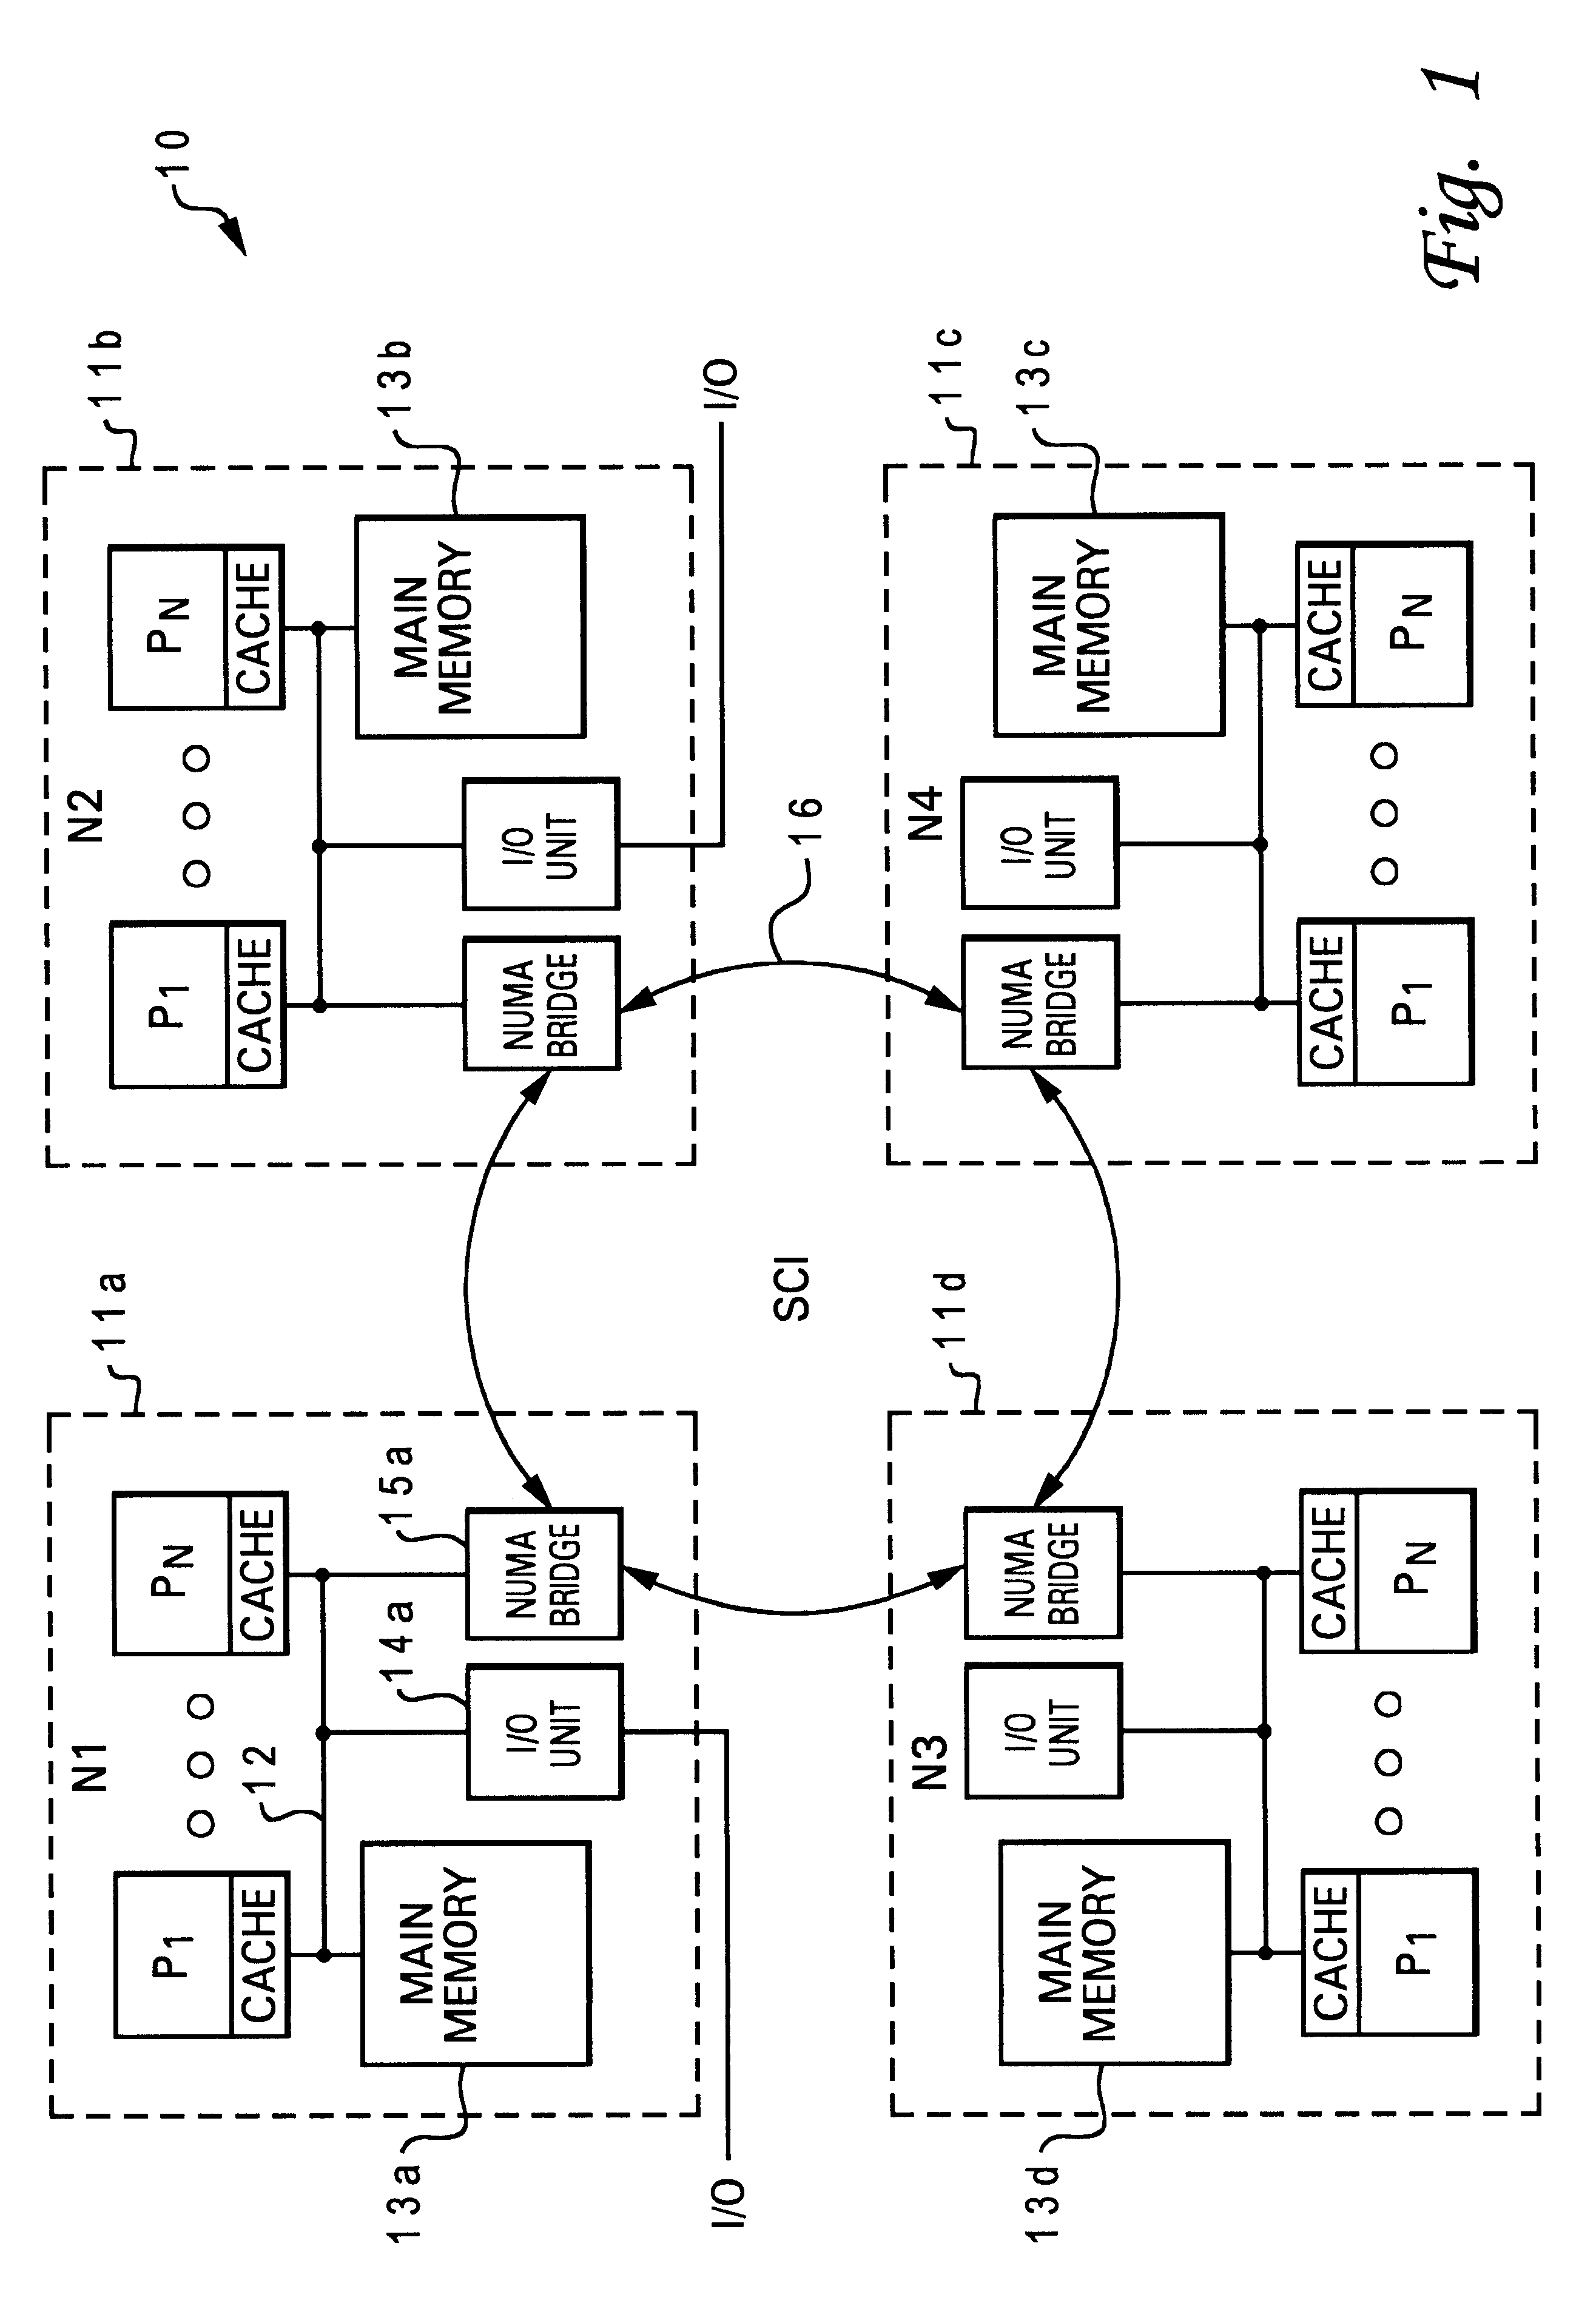 Method and system for supporting software partitions and dynamic reconfiguration within a non-uniform memory access system